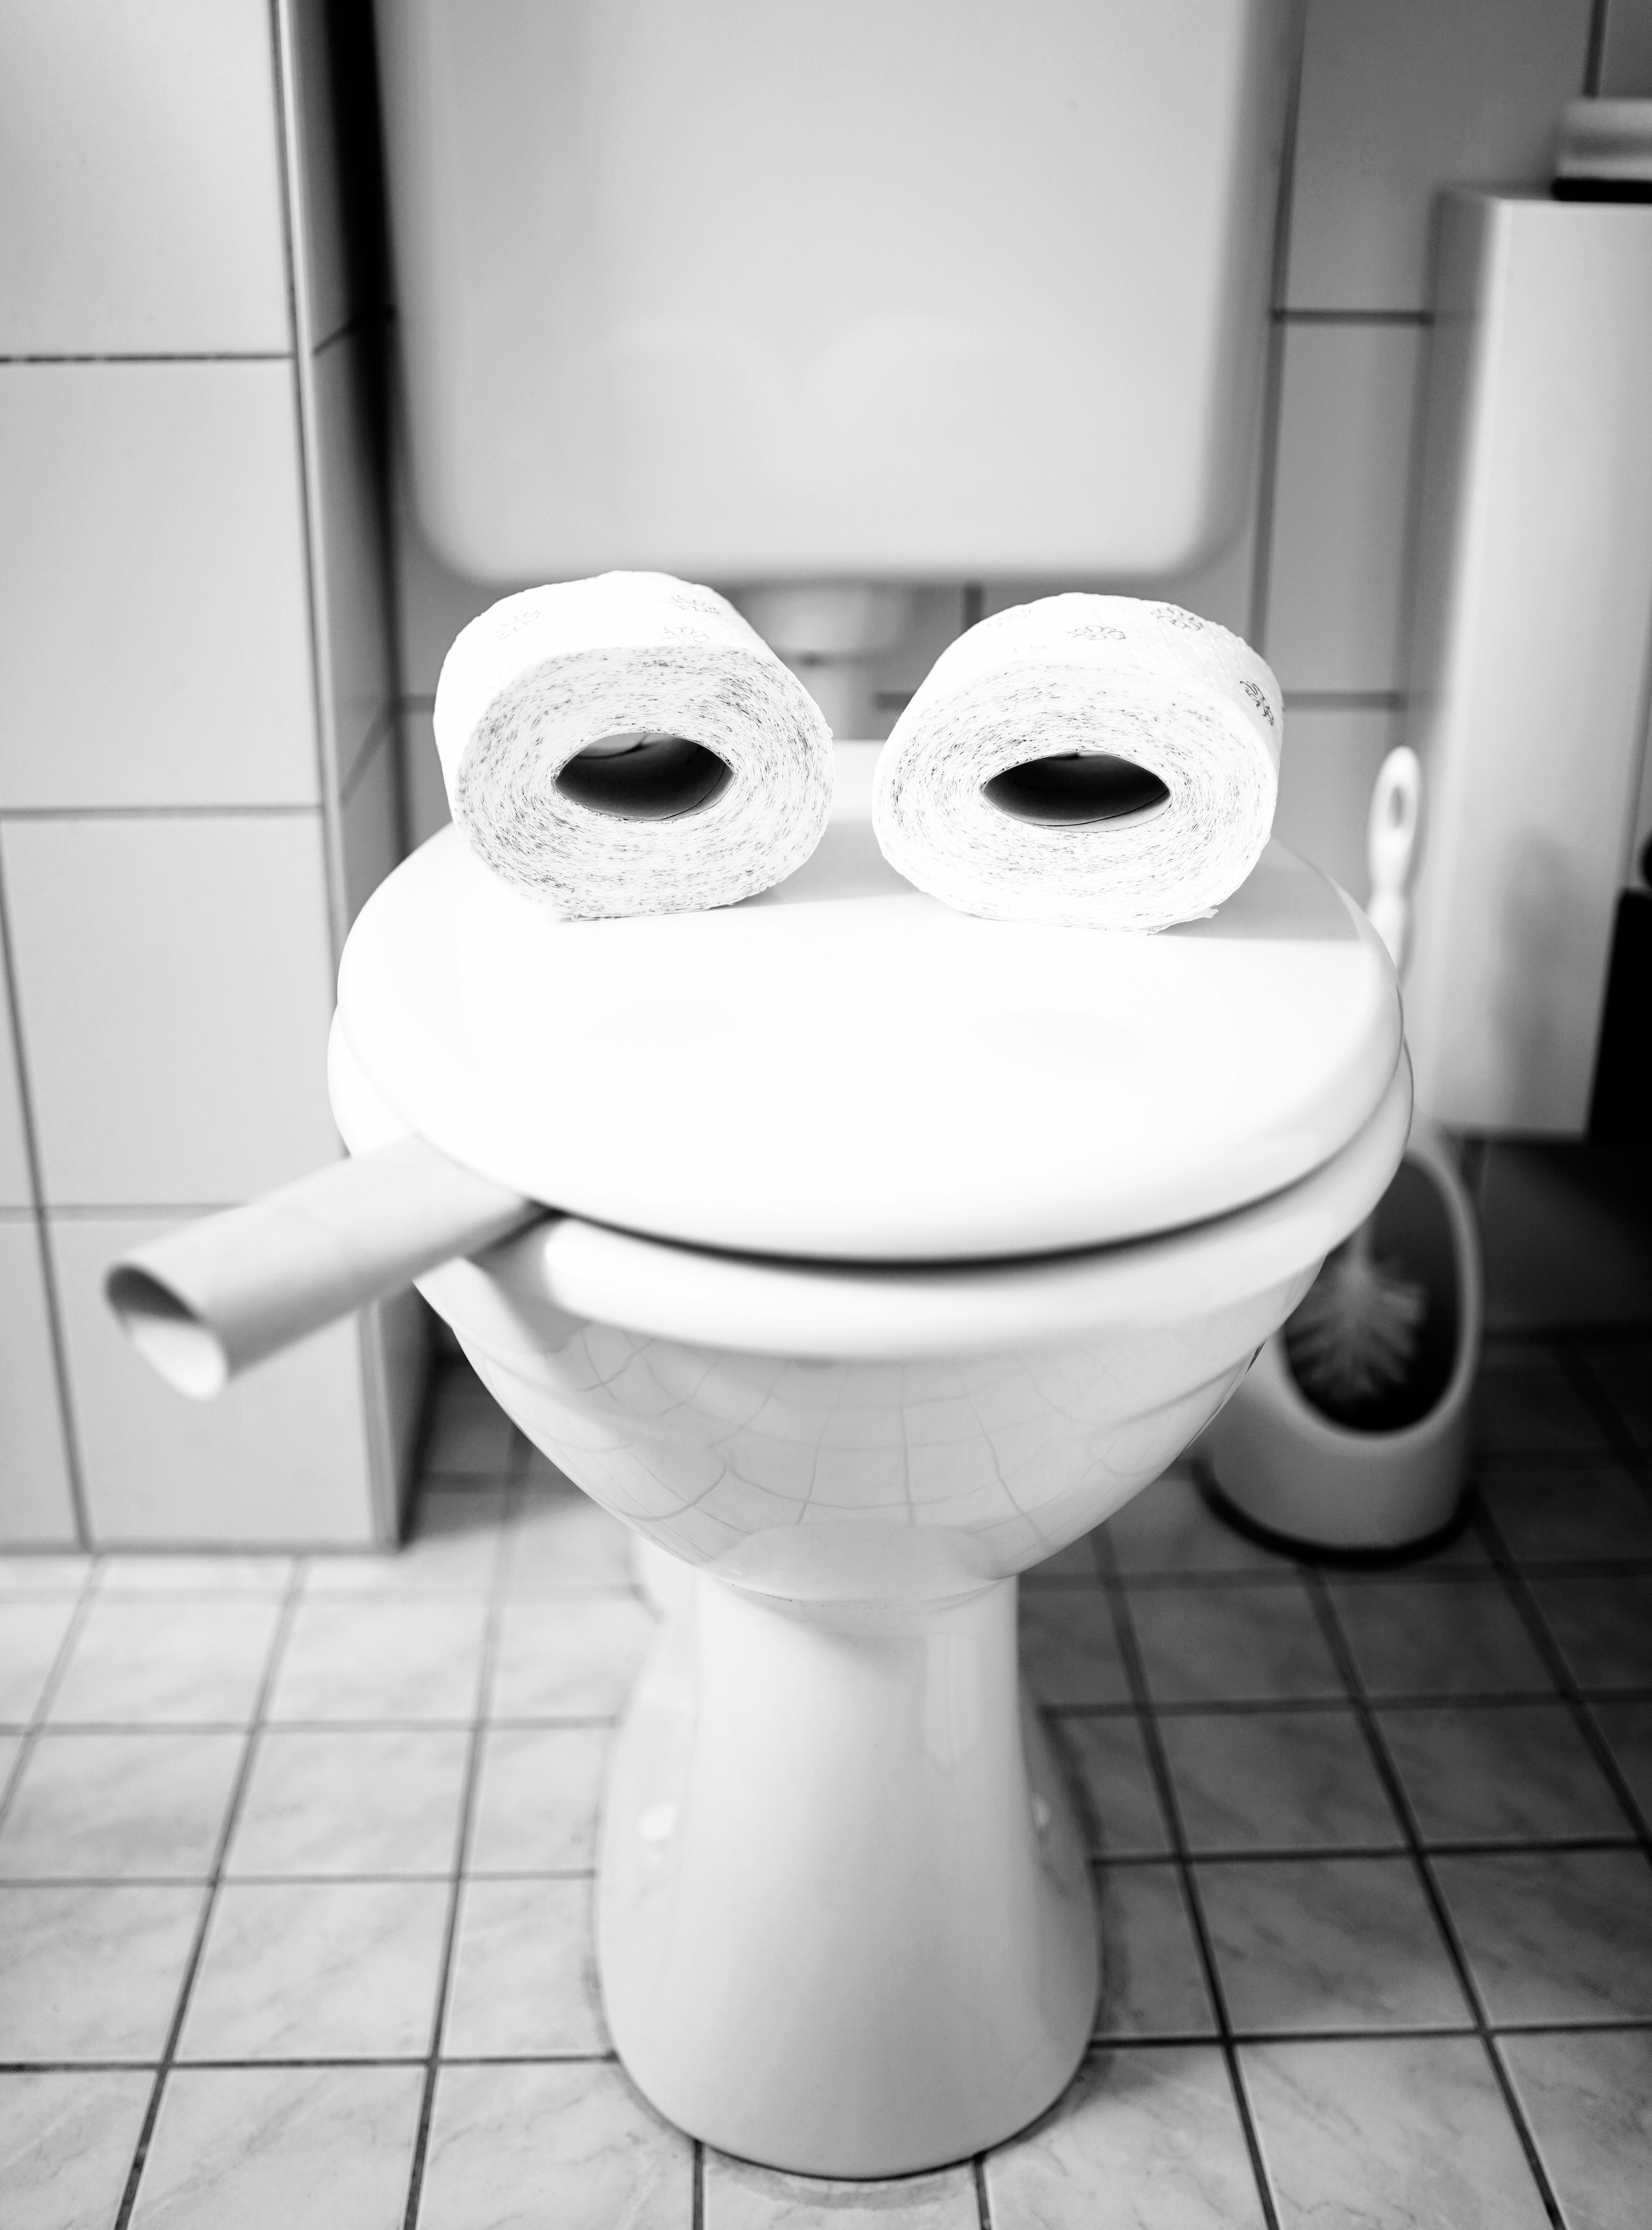 How Much of Your Life is SpentGoing? Plus Other Fascinating (and  Frightening) Toilet Facts - The Portland Loo